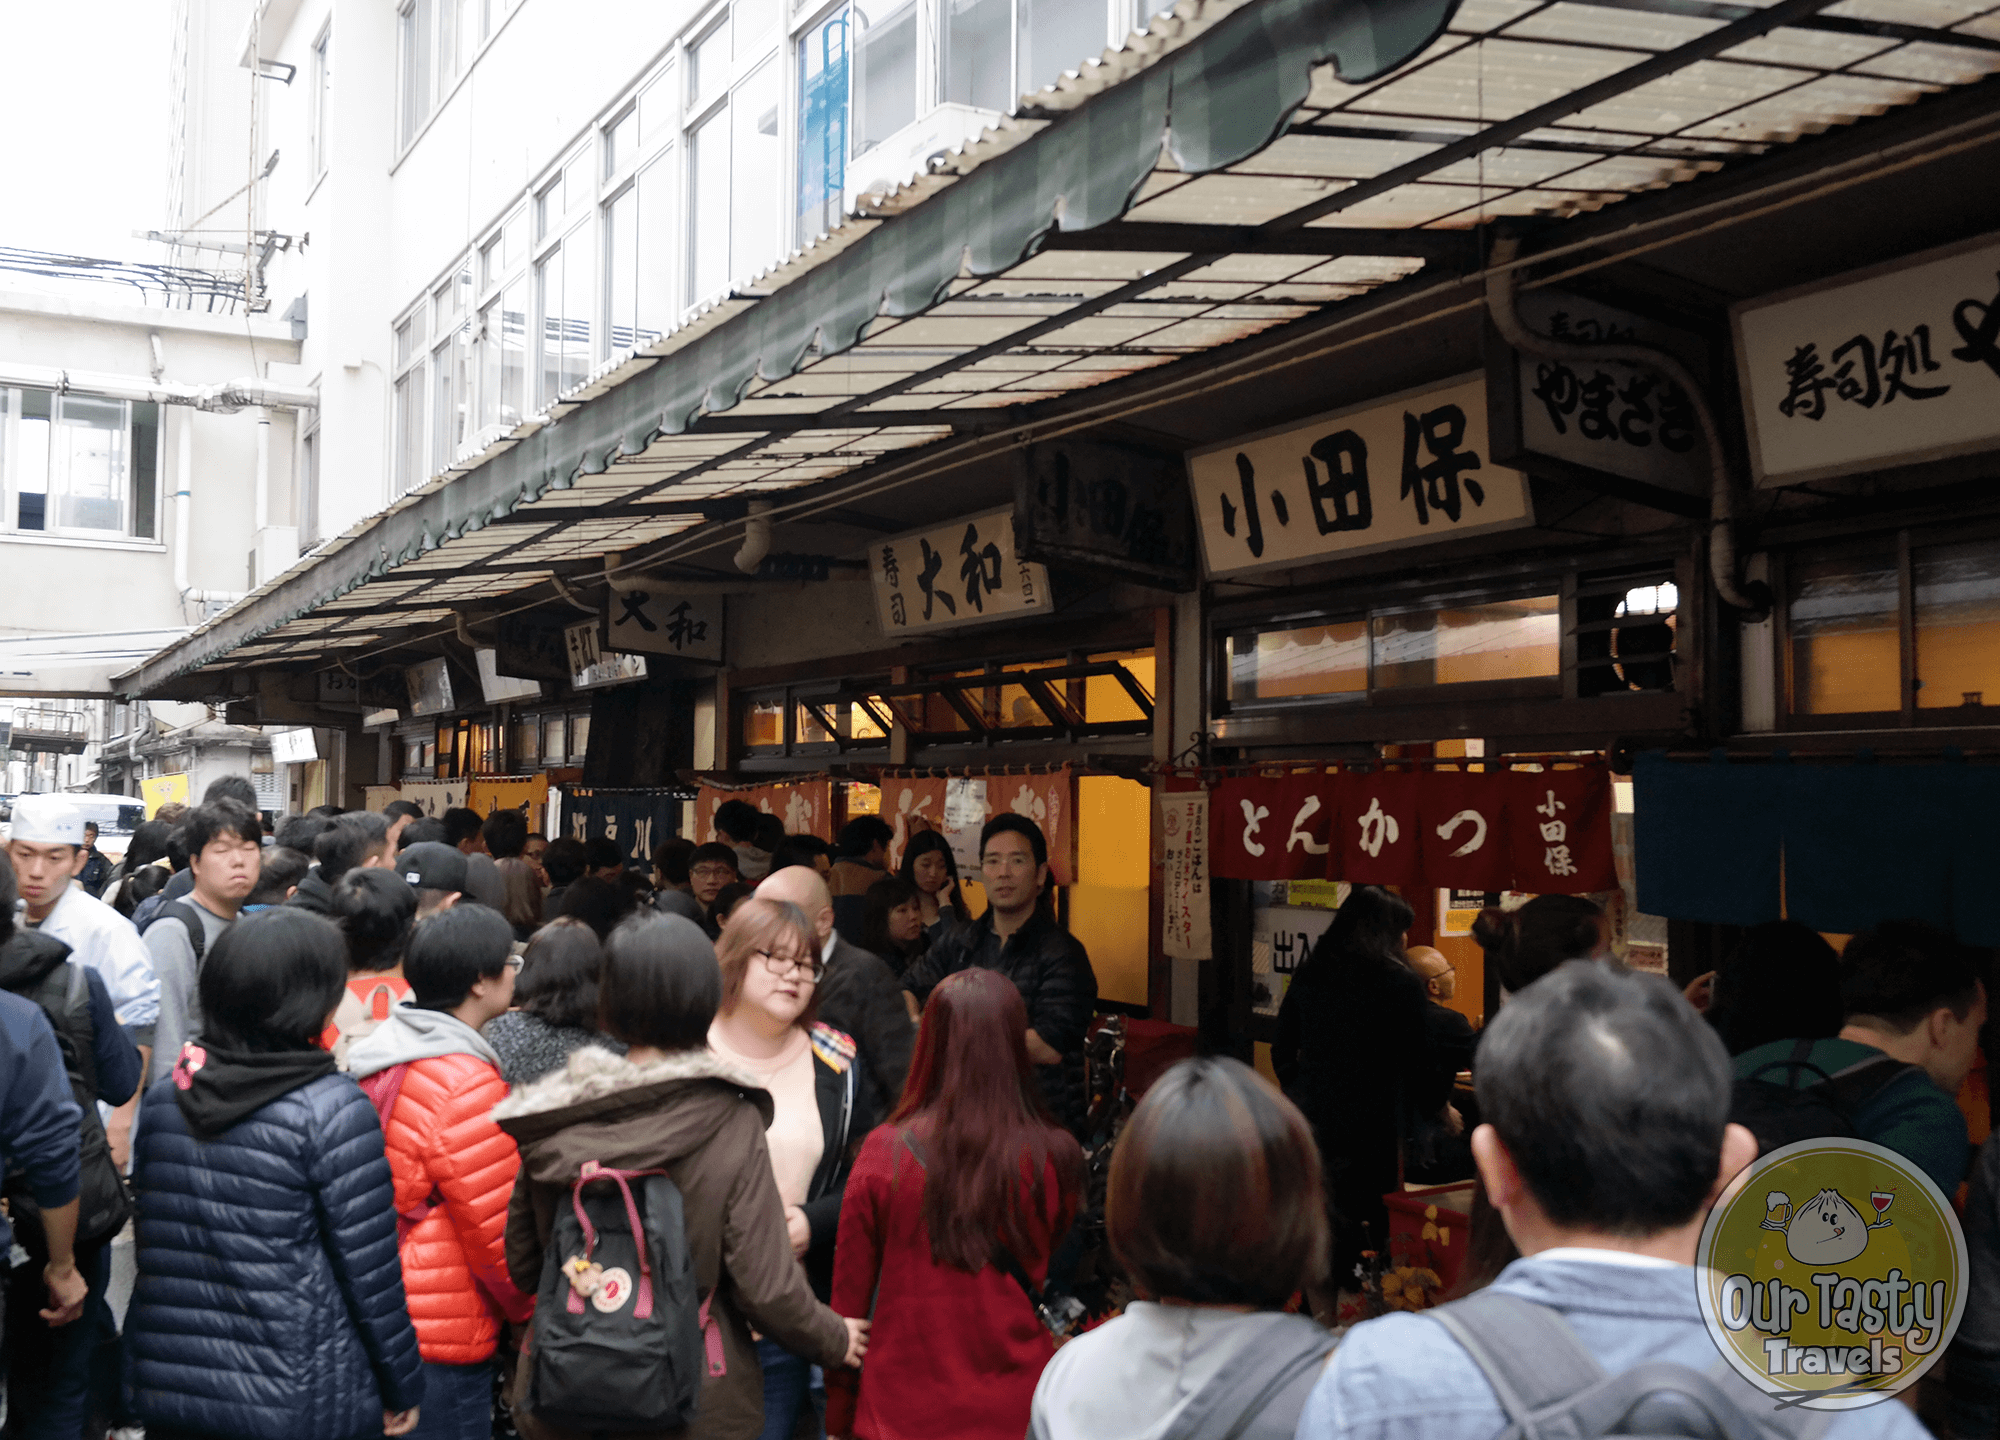 The line of people waiting to get in to try Daiwa Sushi at the Tsukiji Fish Market in Tokyo, Japan - ourtastytravels.com